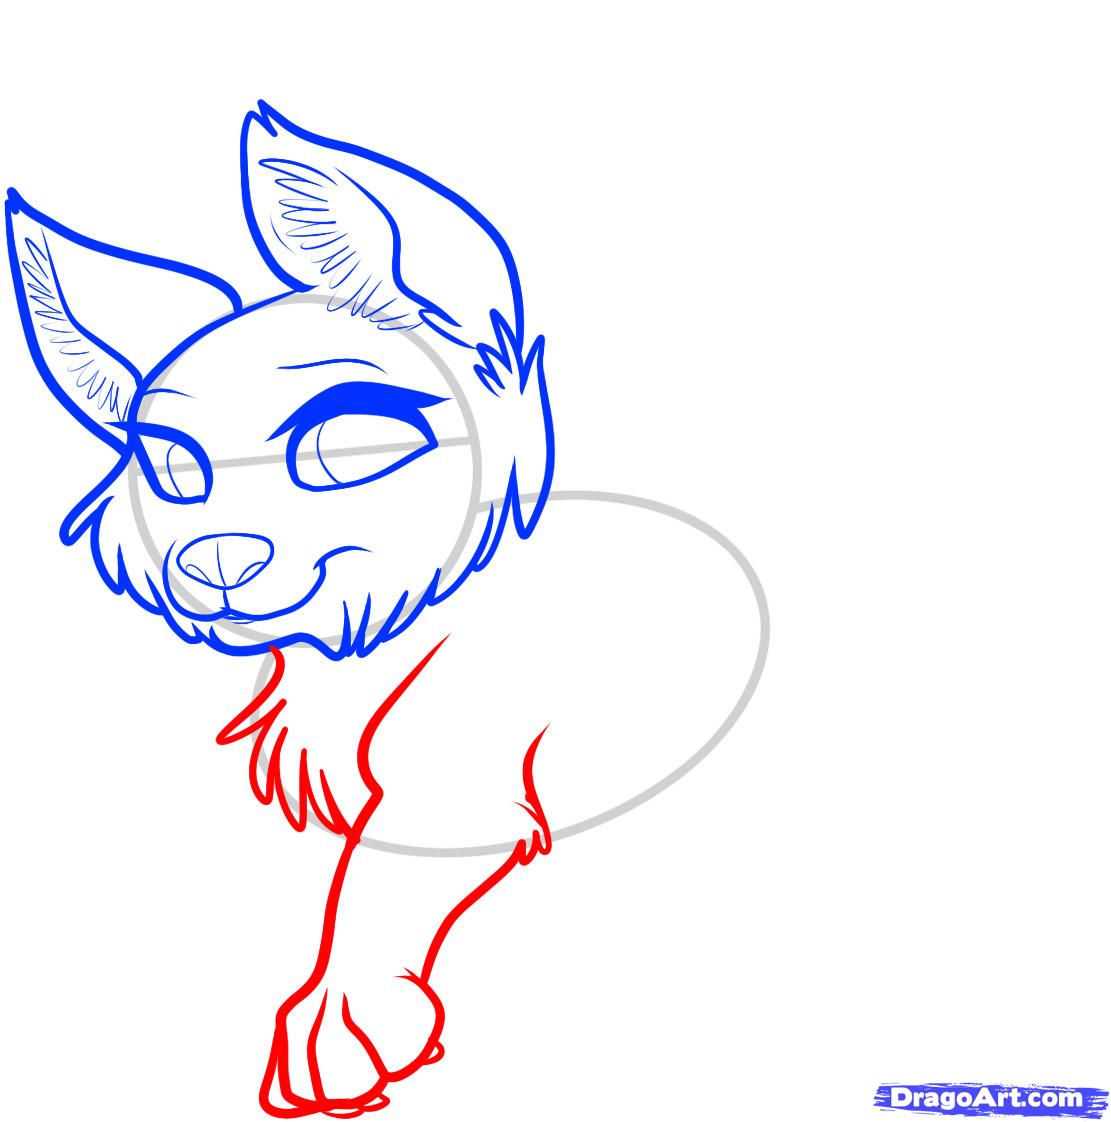 Wolf clipart flying. How to draw a